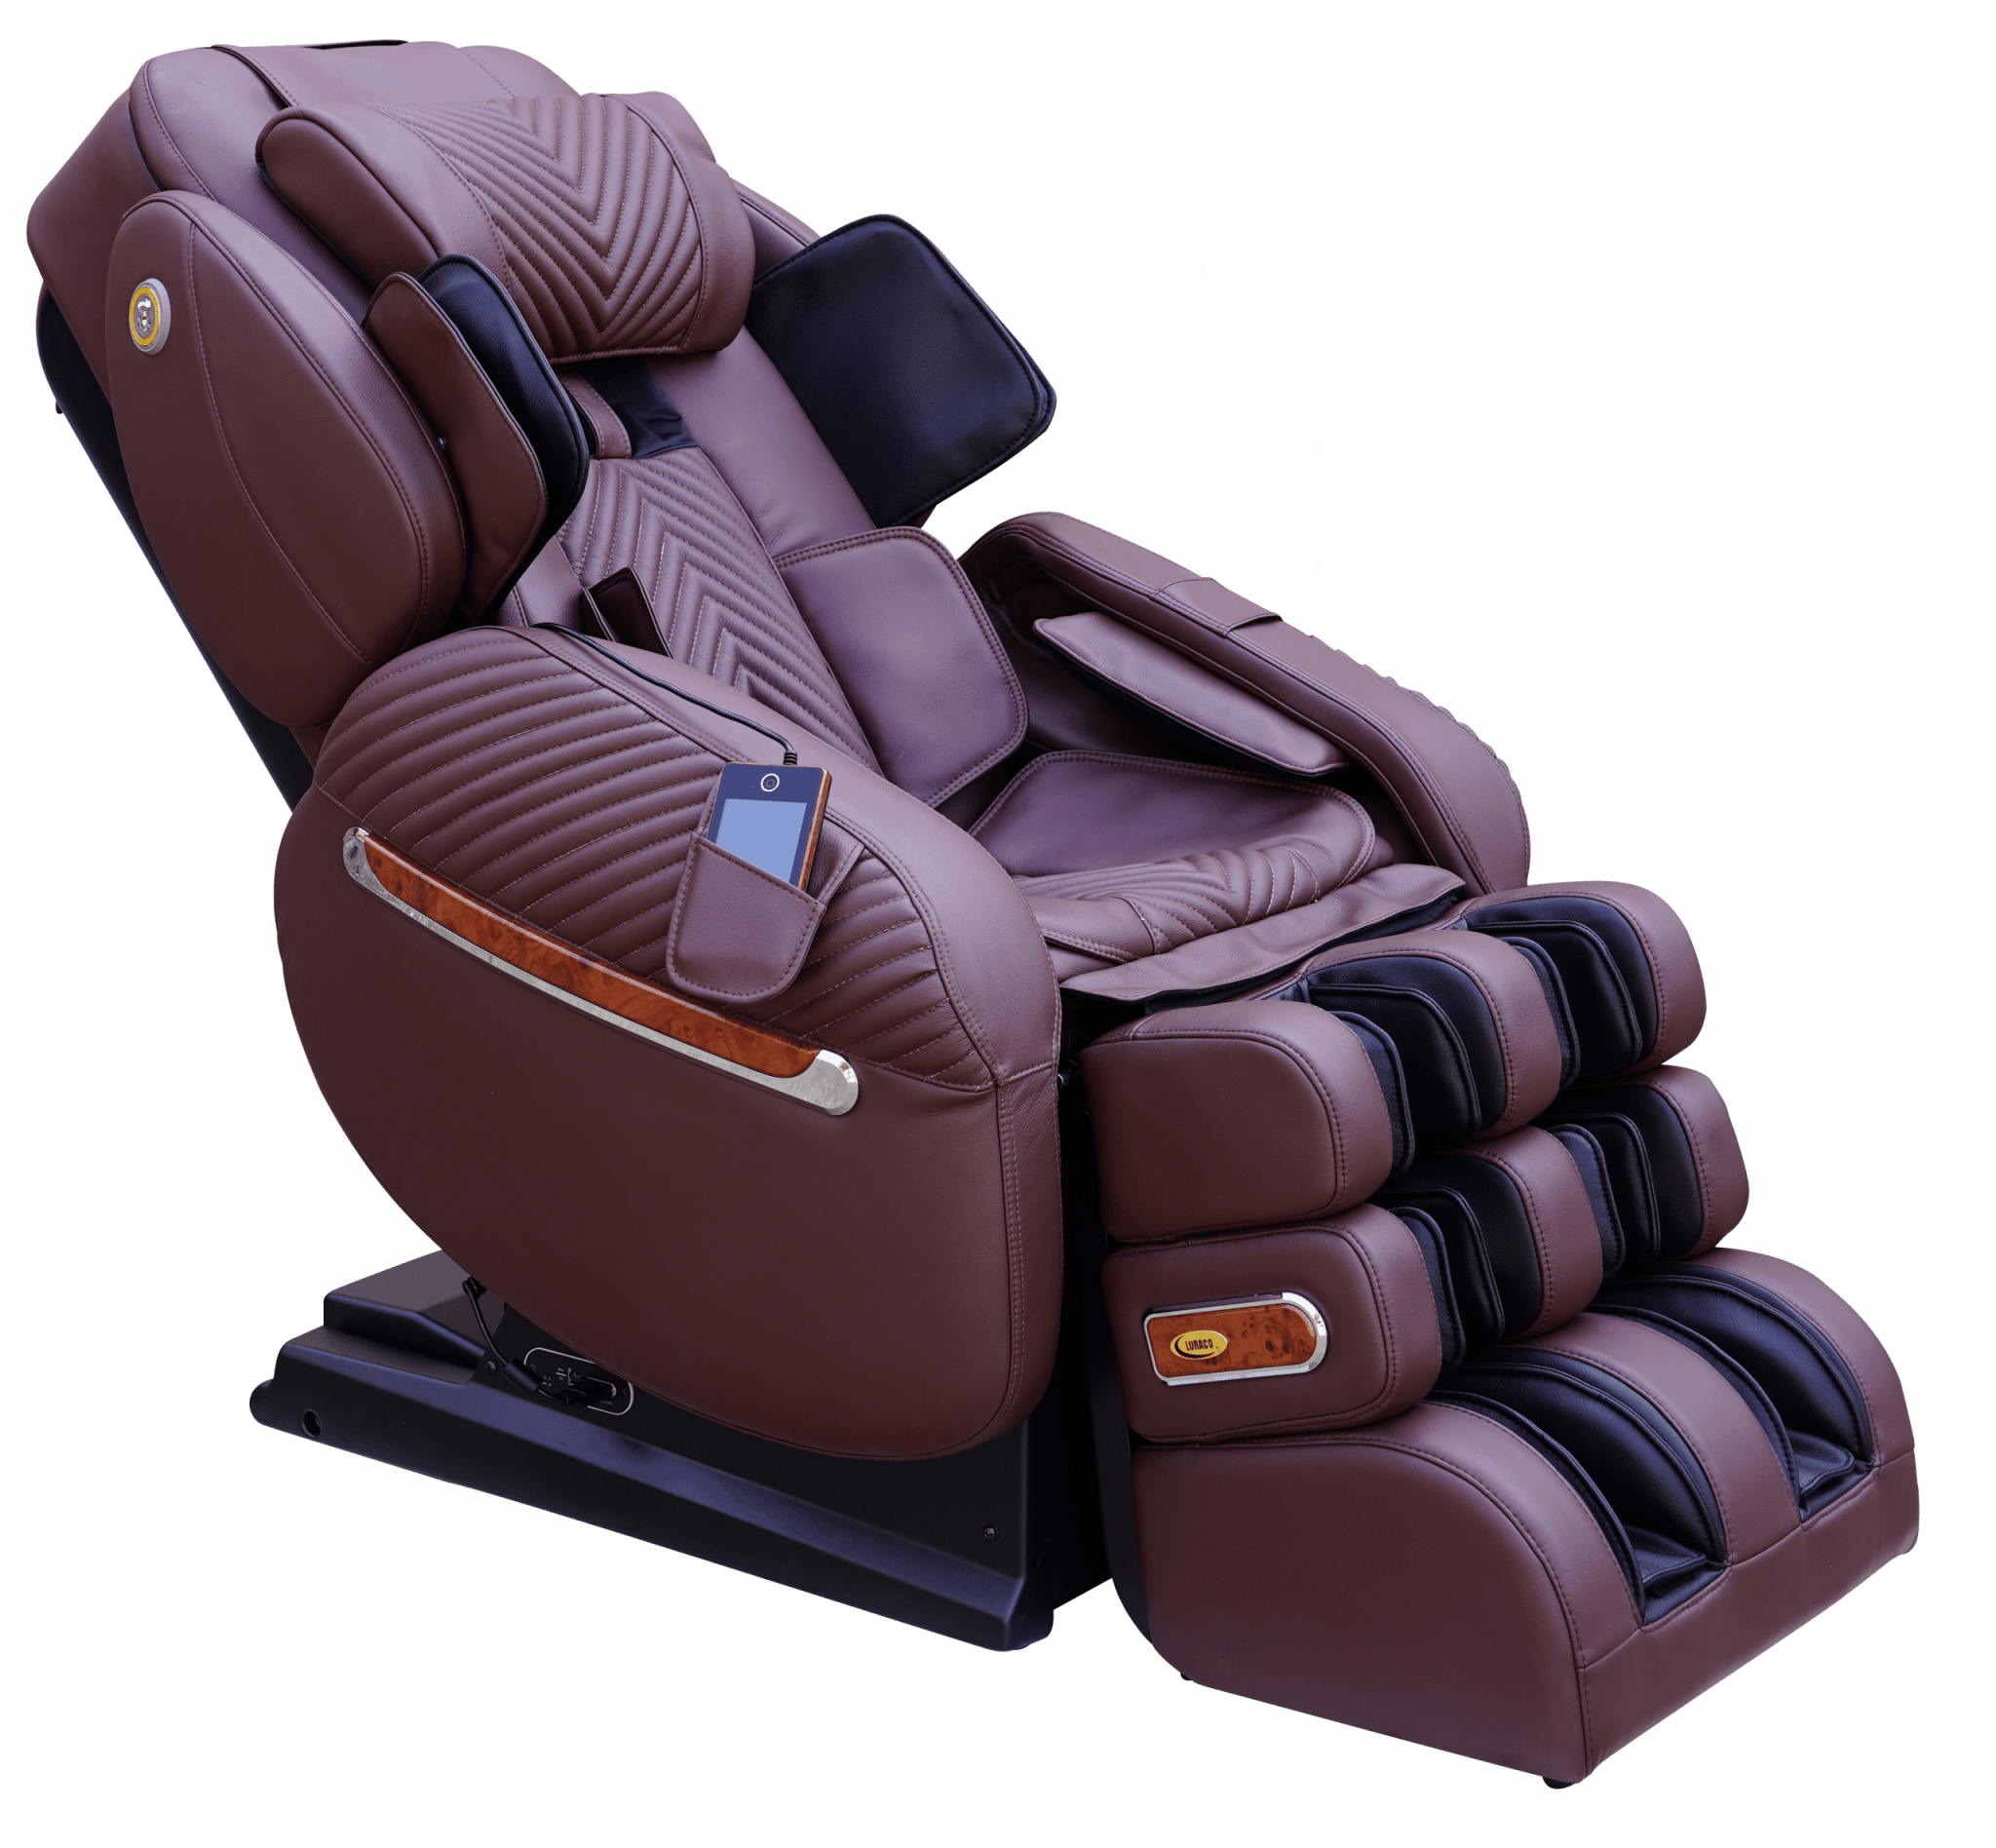 Luraco i9 Max PLUS  Made in USA Medical Massage Chair